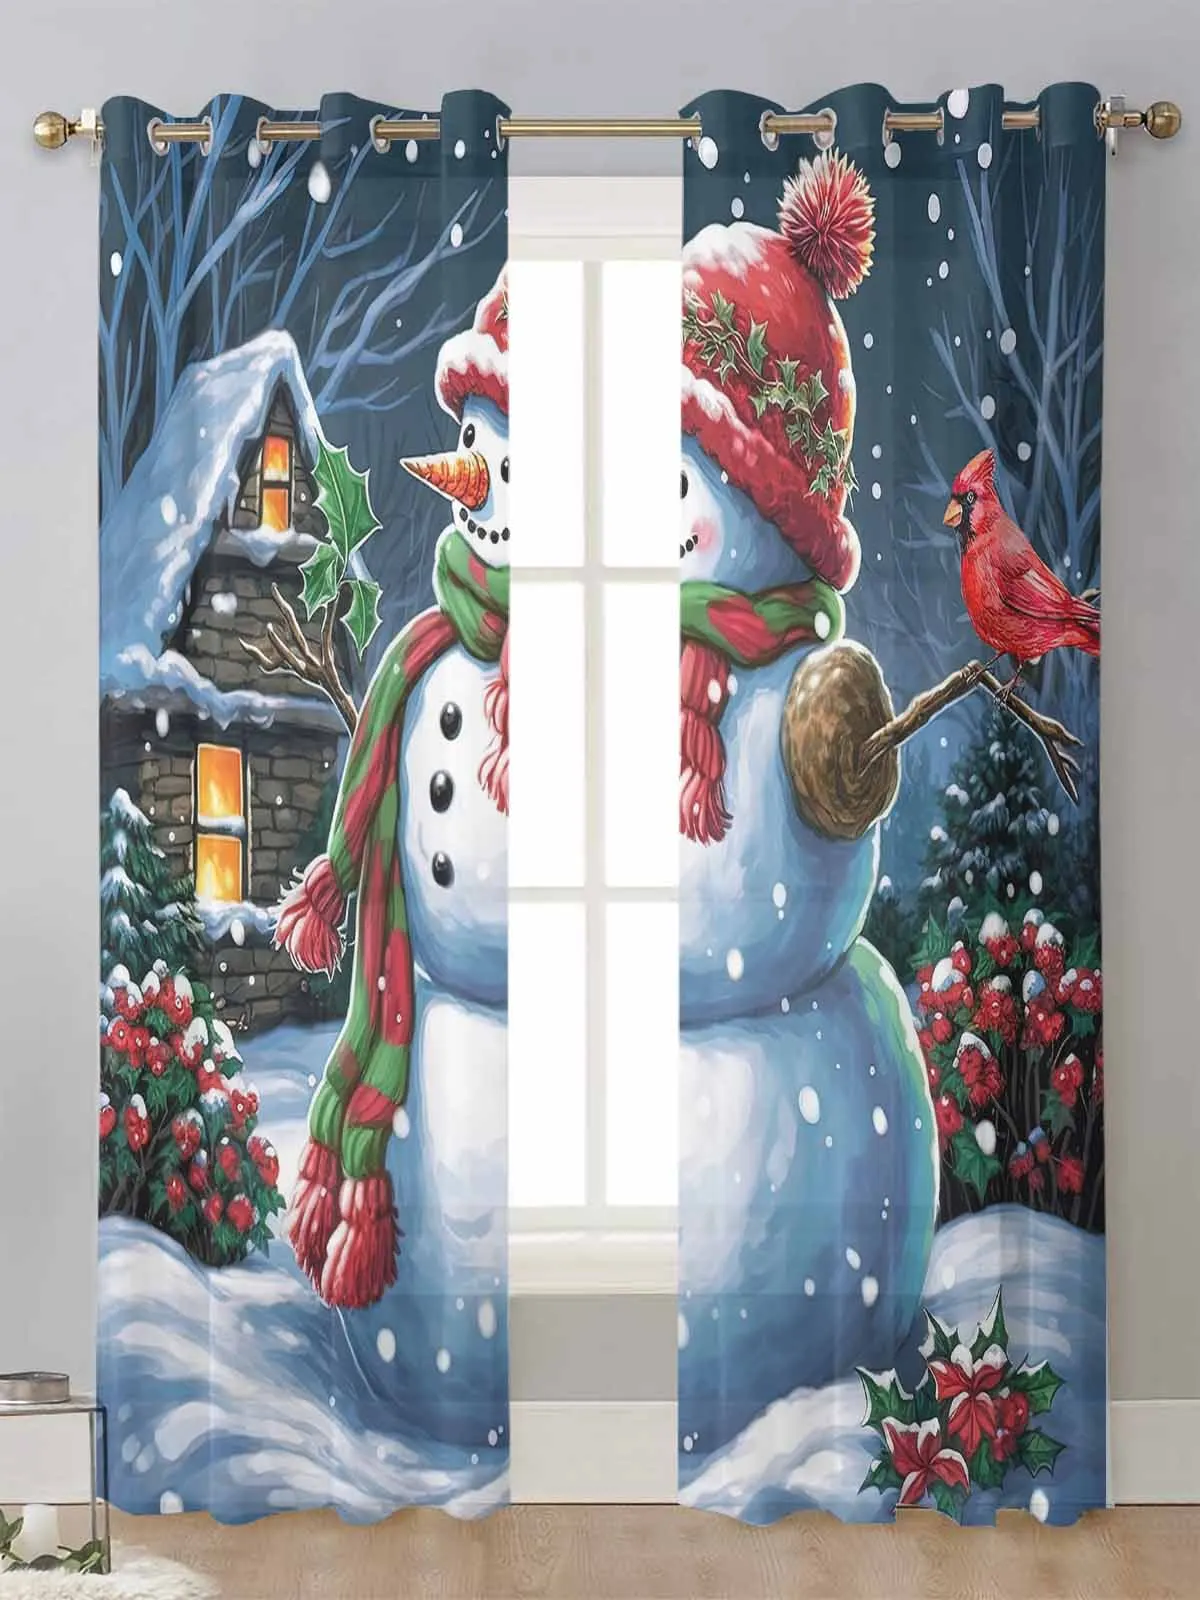 

Christmas Snowman Bird House Sheer Curtains For Living Room Window Transparent Voile Tulle Curtain Cortinas Drapes Home Decor